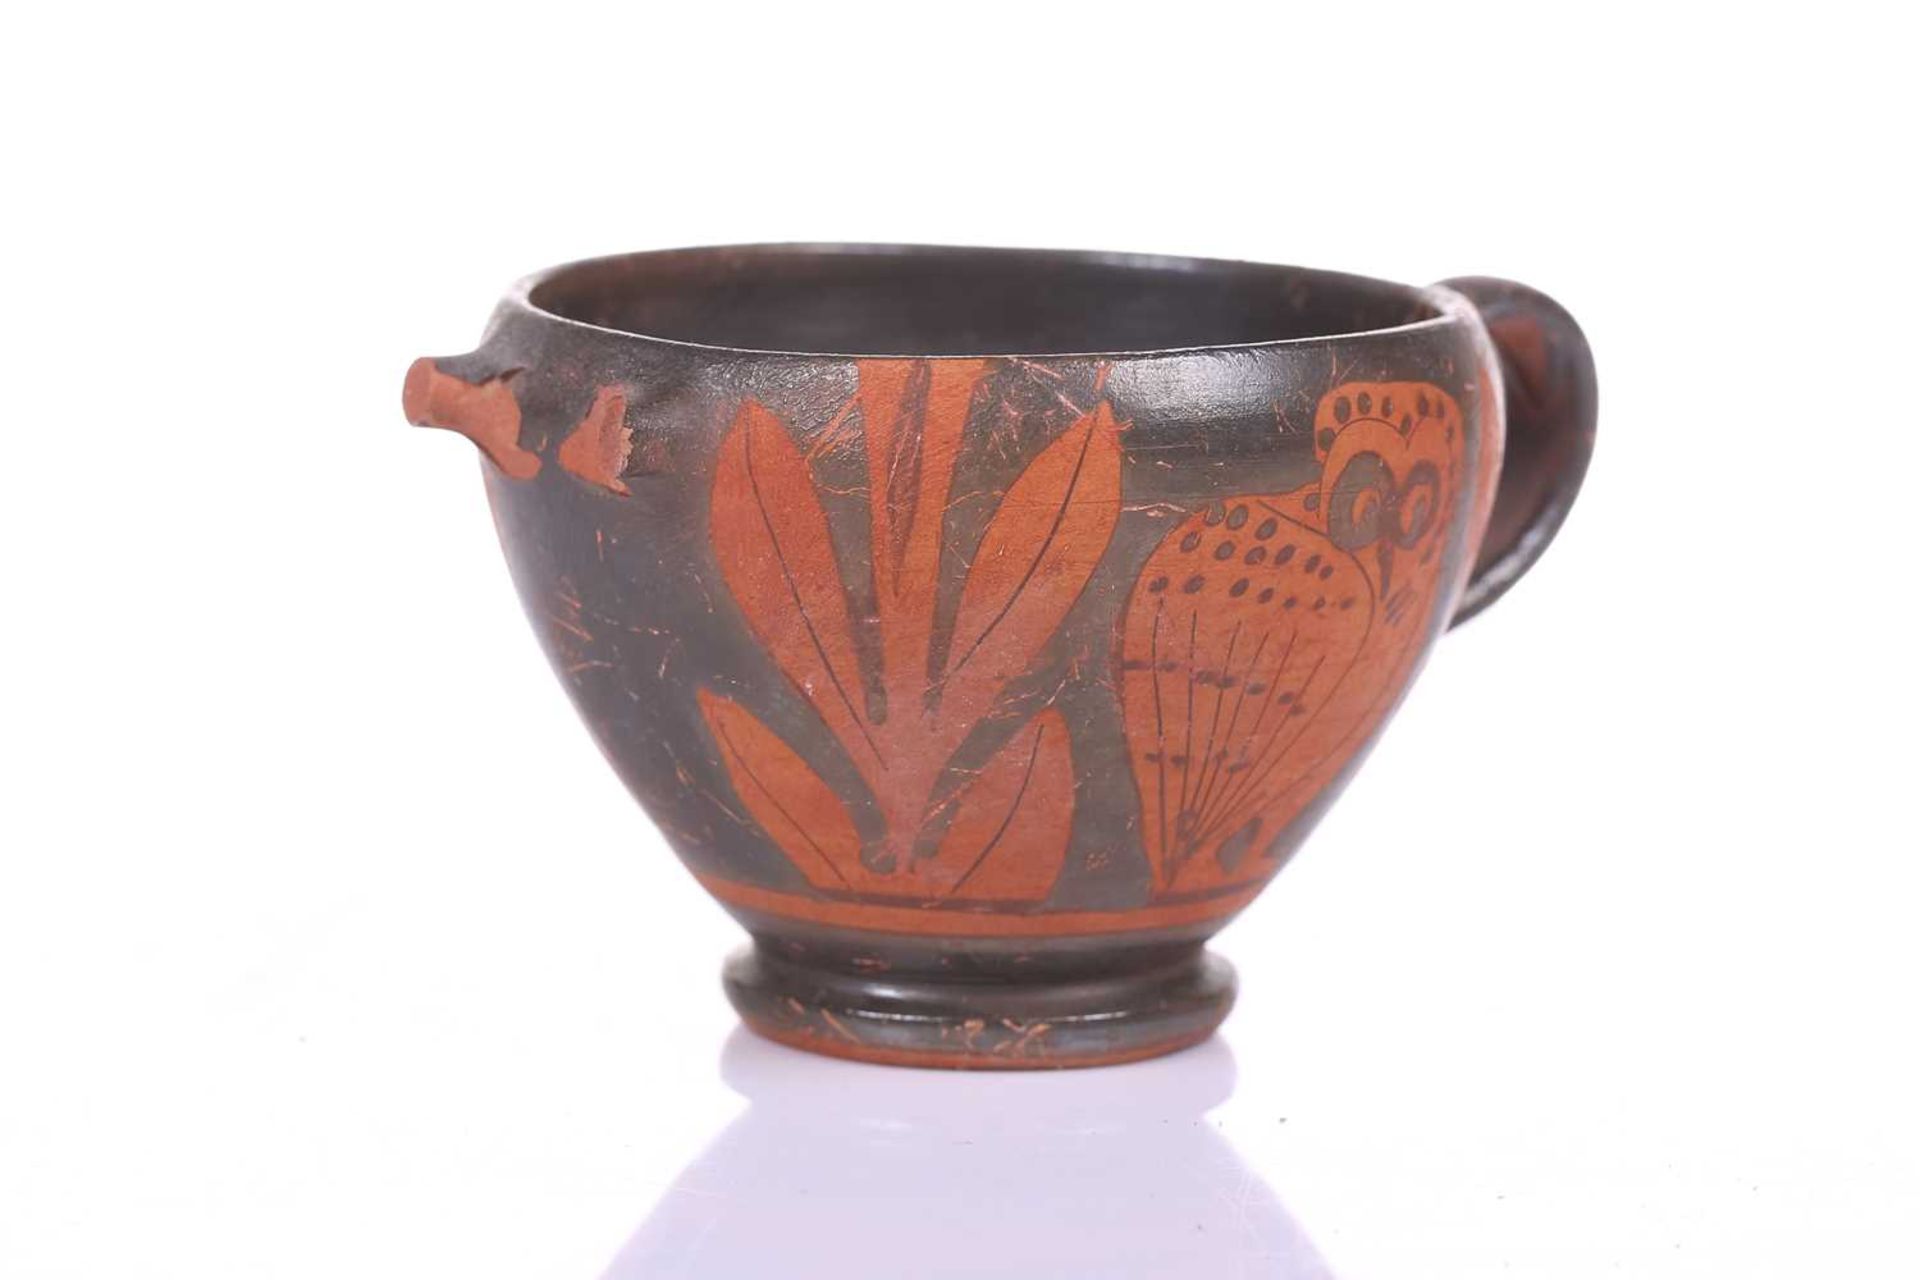 An Athenian-style ritual cup, 4th century BC or later, decorated with the "Owl of Athena" amidst - Image 3 of 8